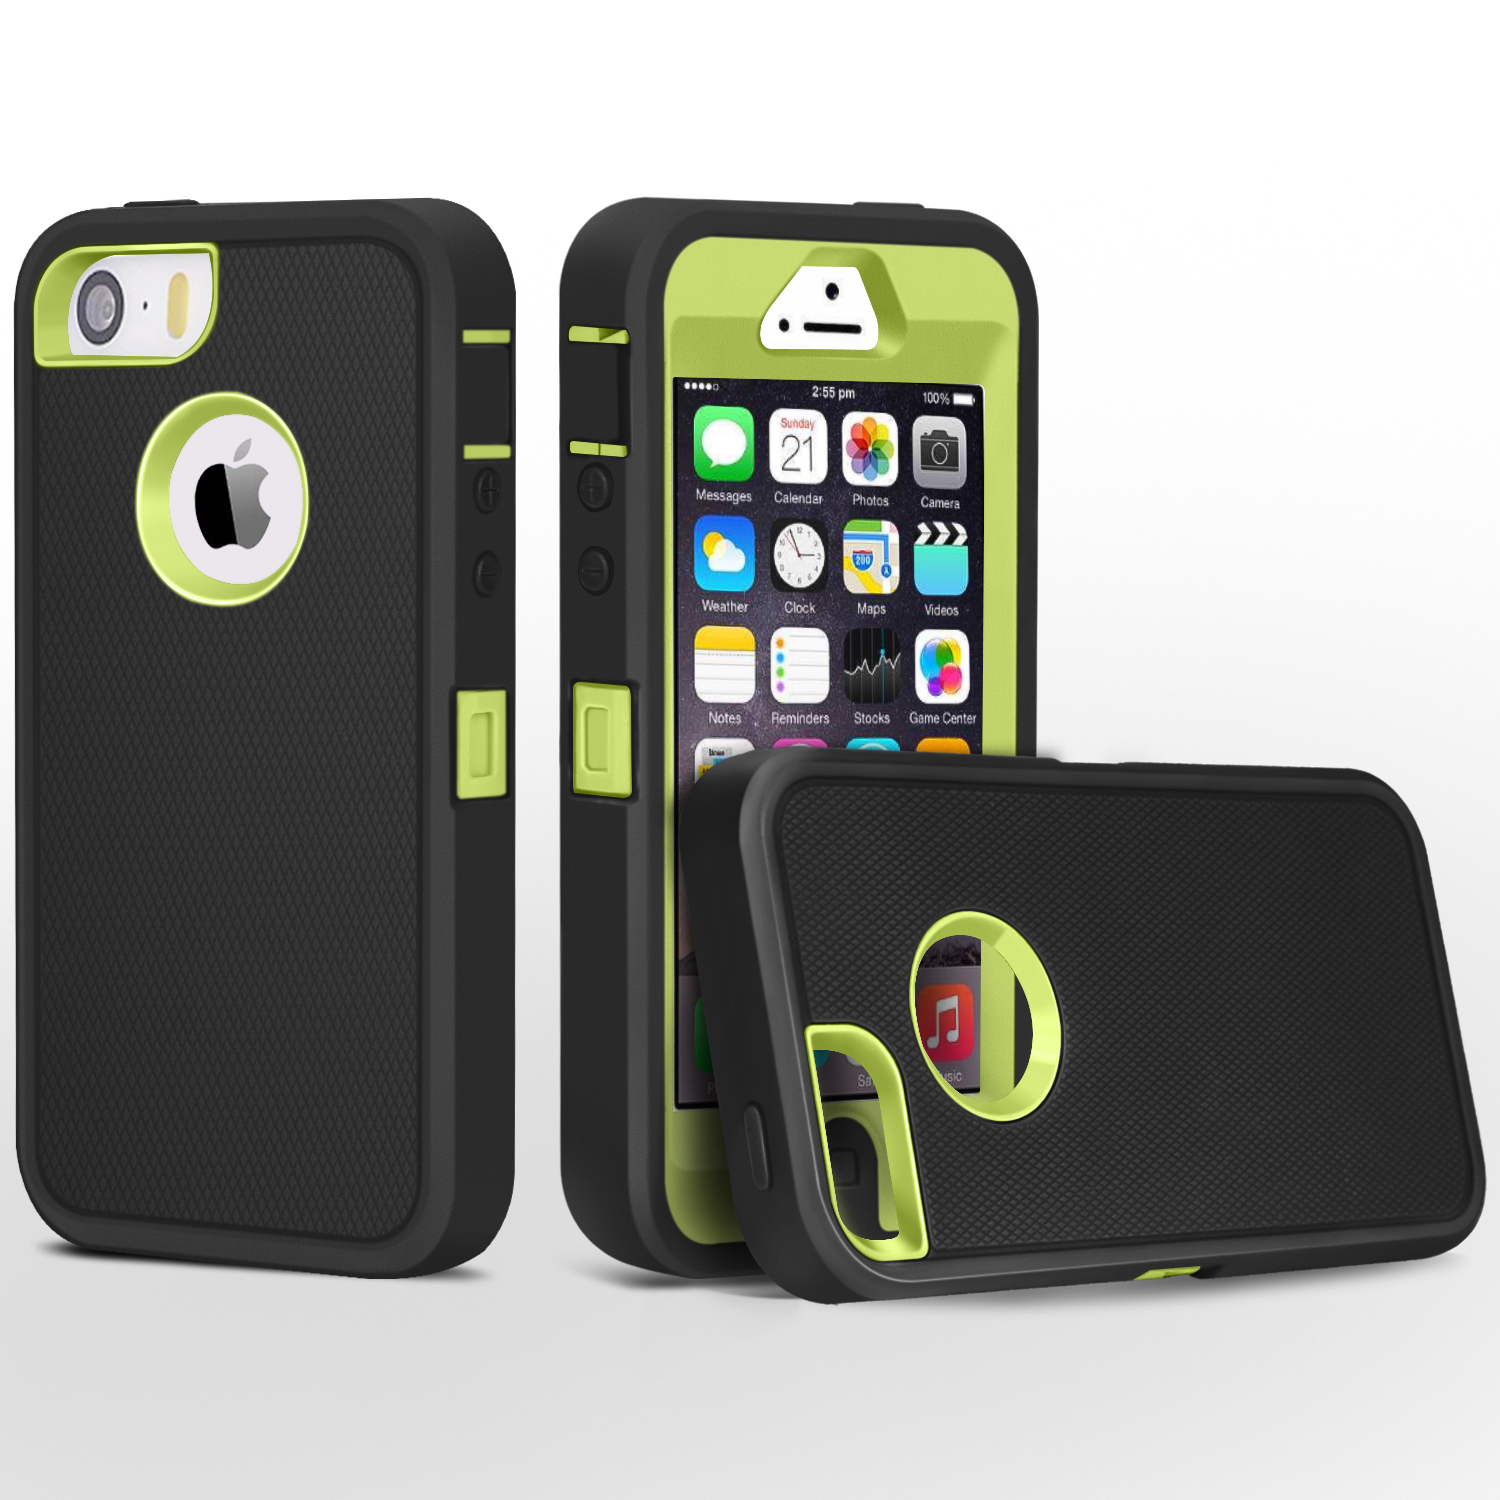 iPhone 5 Case, FogeekHeavy Duty PC + TPU Combo Protective Defender Body Armor Case for iPhone 5 & iPhone 5S(Black/Green)